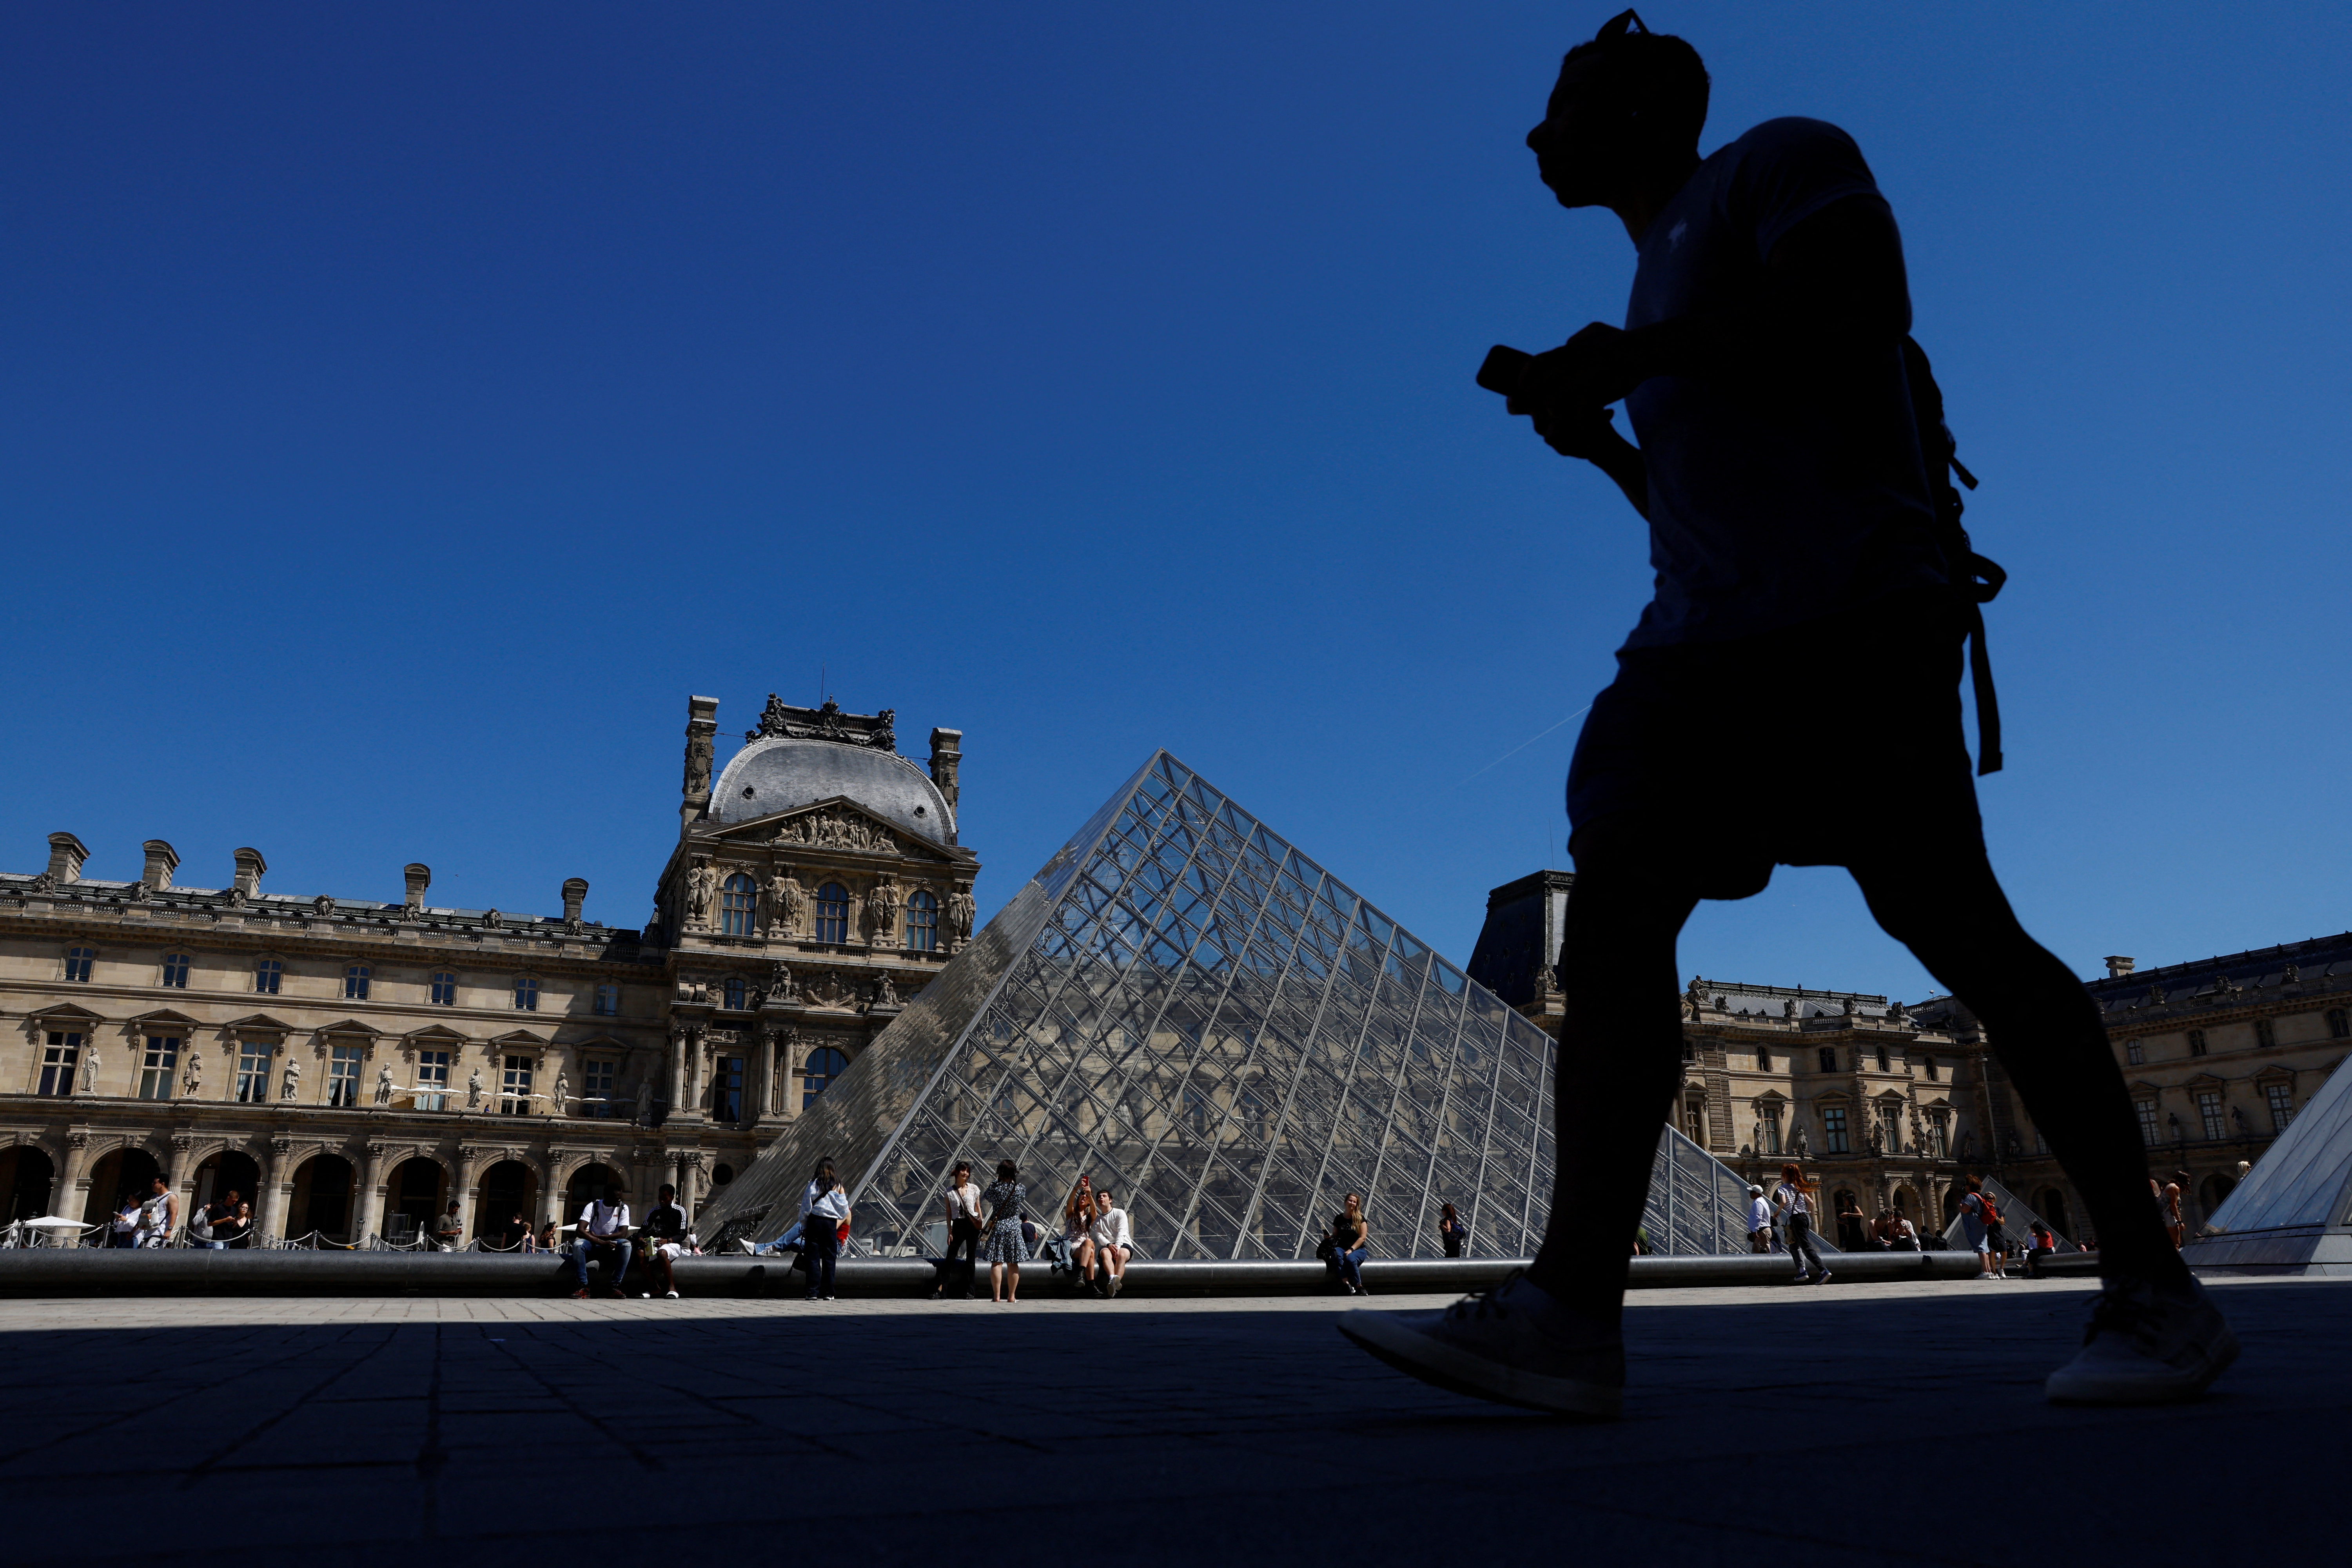 A man walks near the glass Pyramid of the Louvre museum in Paris